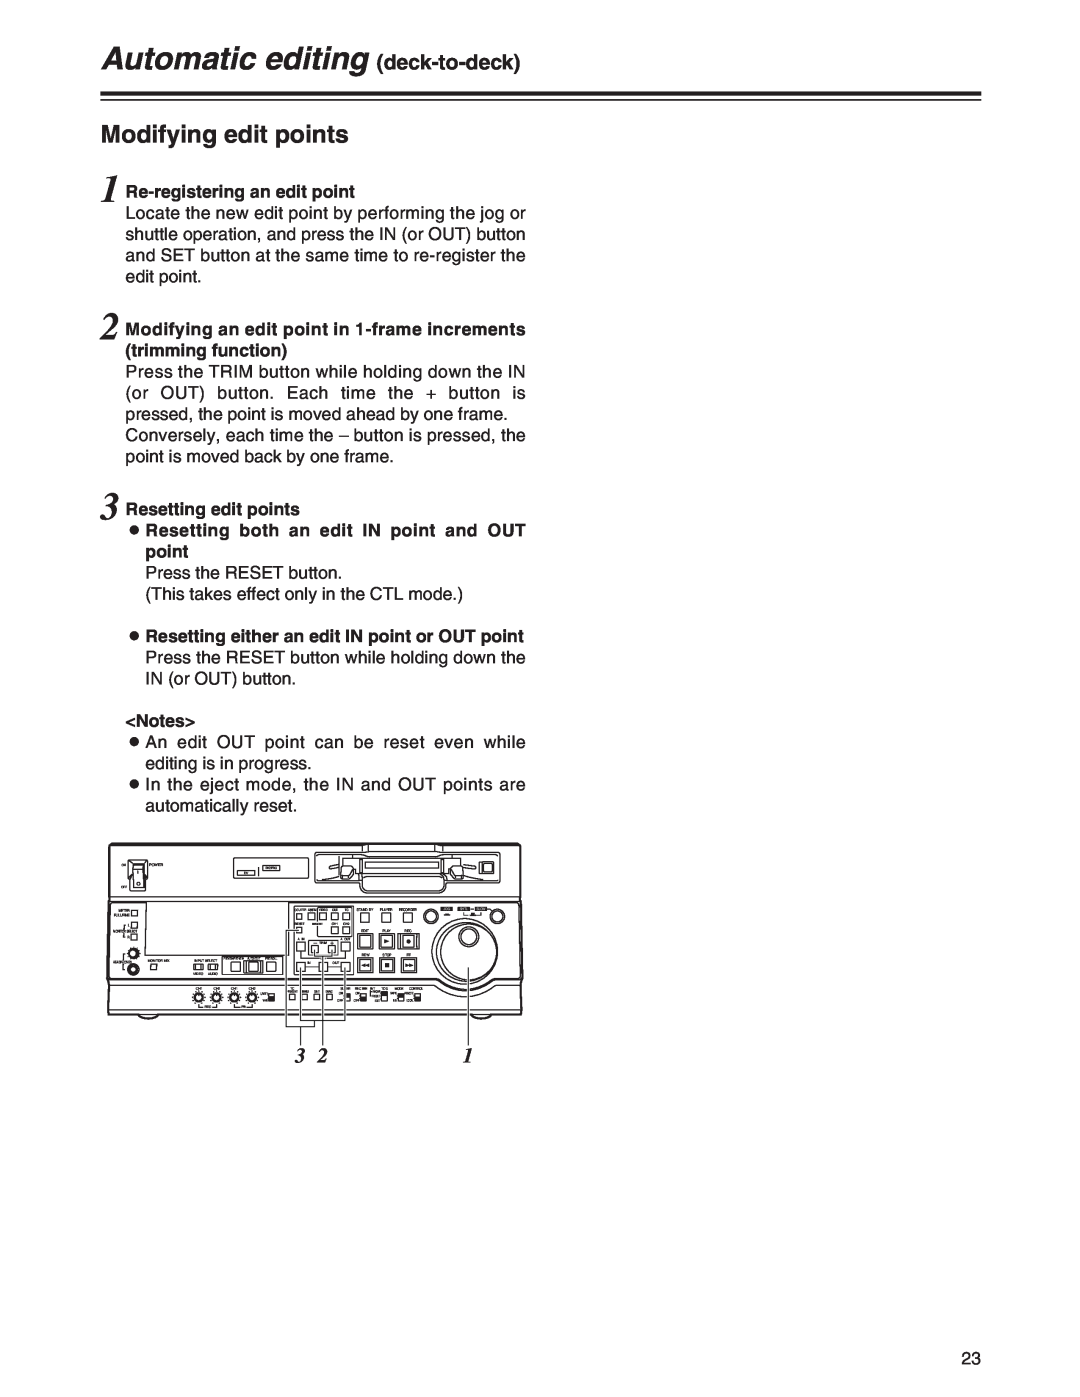 Panasonic AJ-SD755 operating instructions Modifying edit points, Re-registering an edit point, Resetting edit points 